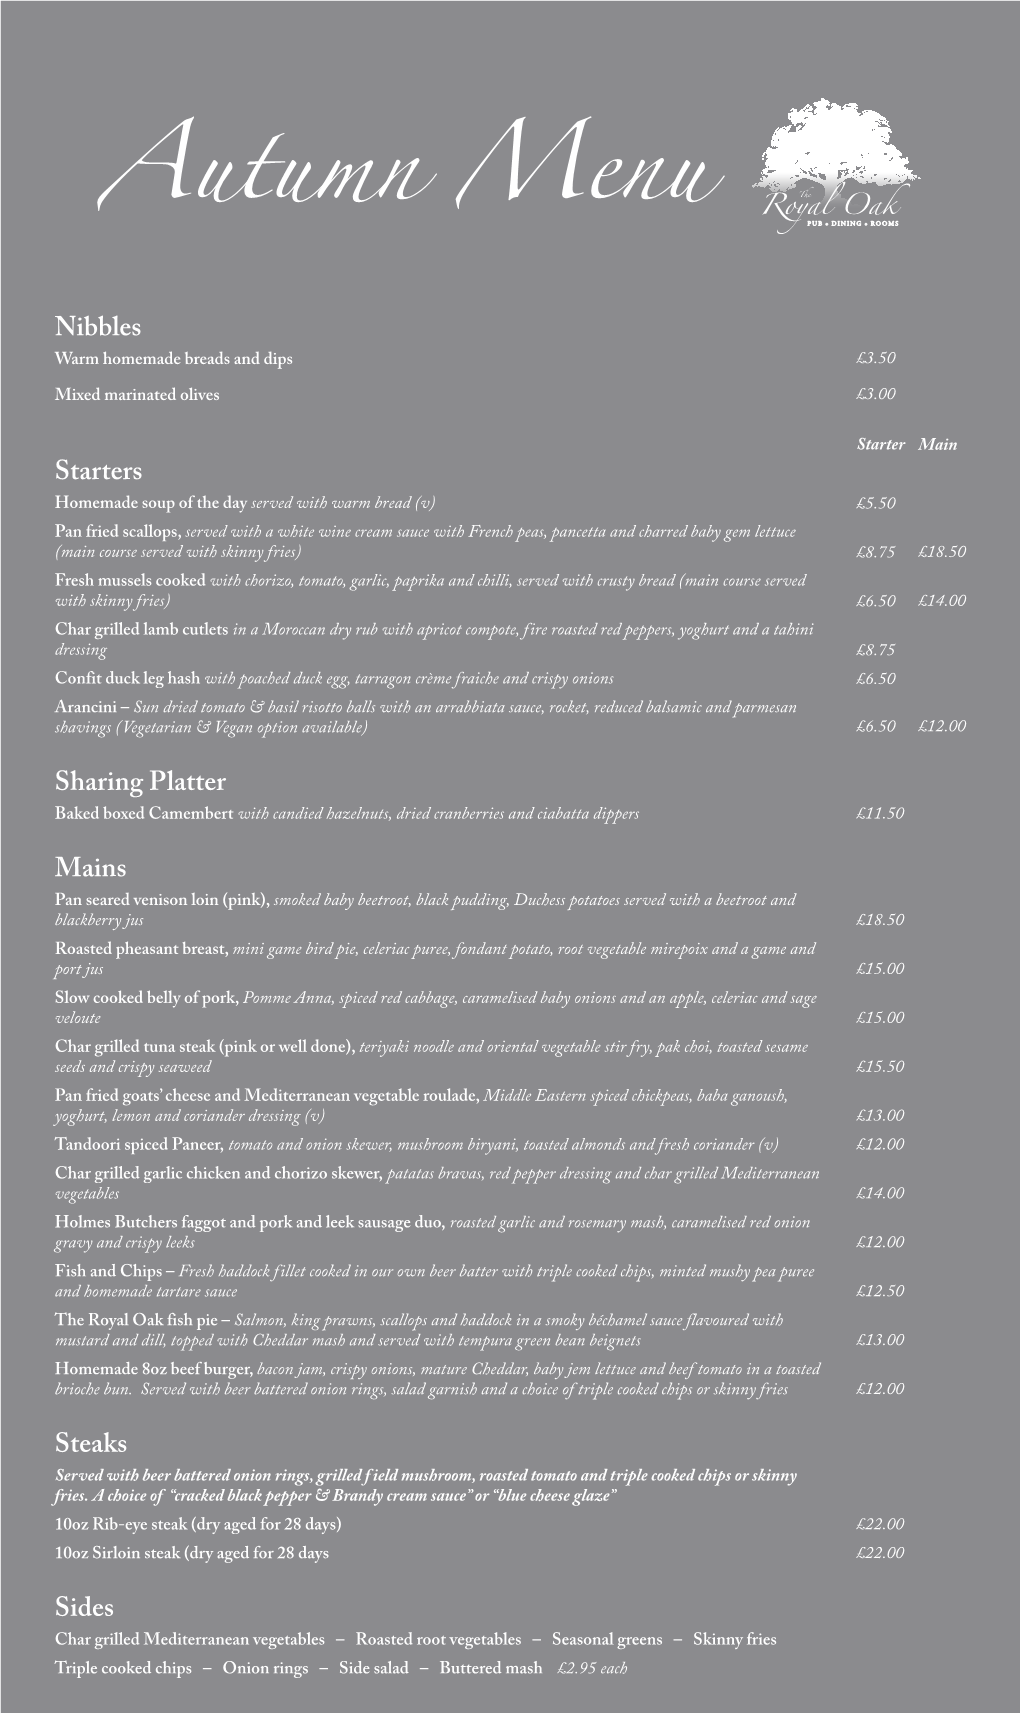 Autumn Menu Nibbles Warm Homemade Breads and Dips £3.50